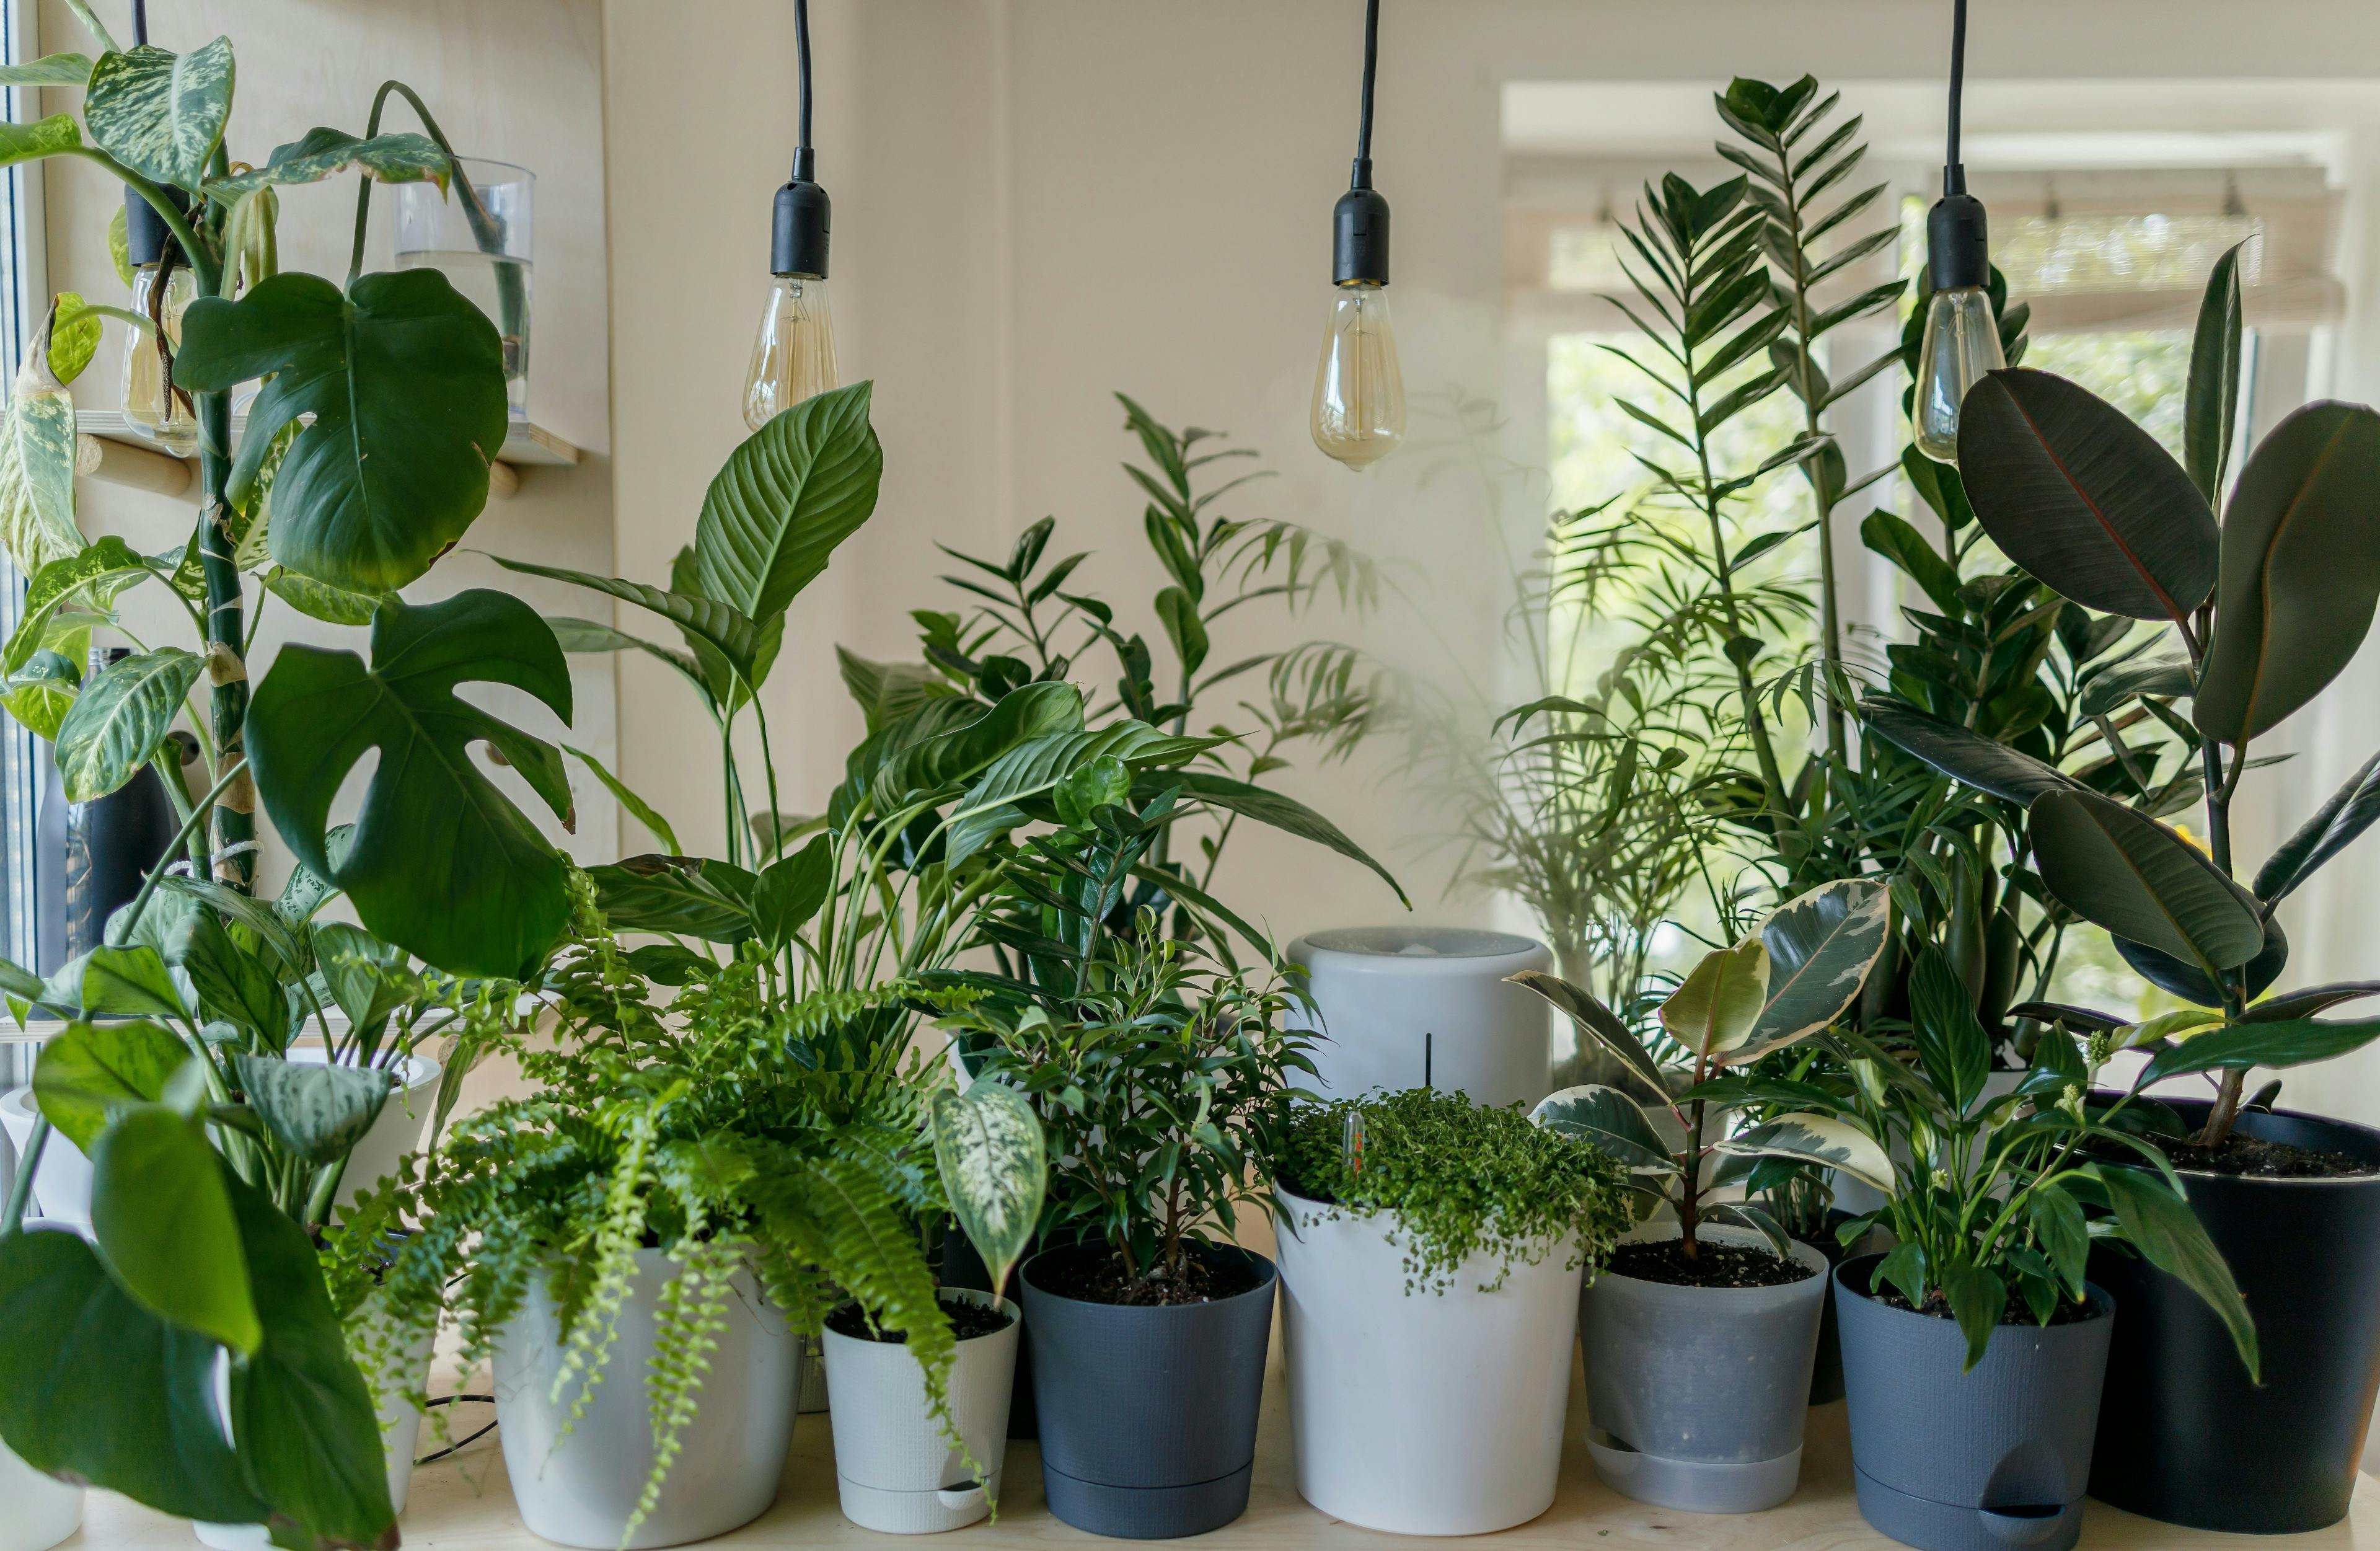 A line up of different office plants ranging in colors and sizes. Some of the pots are white, and the others are blue